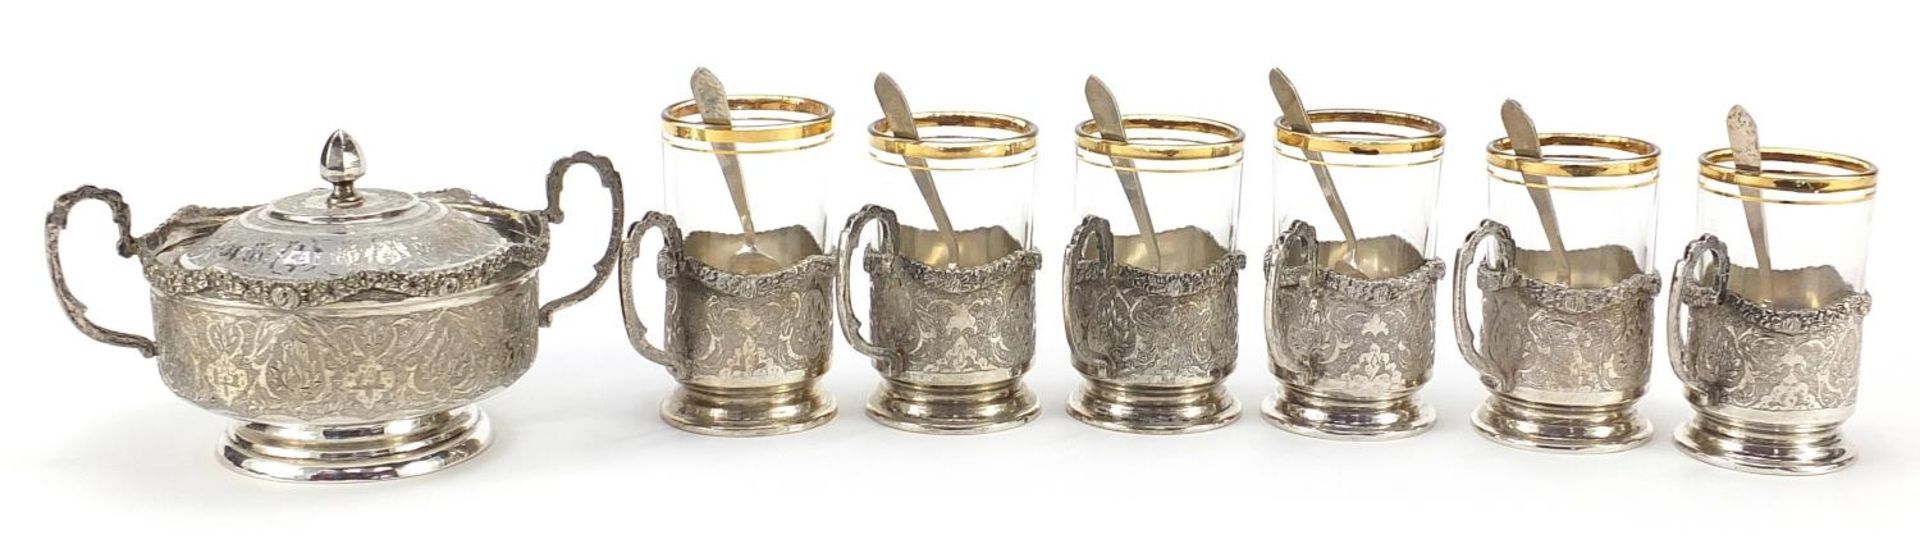 Persian silver twin handled bowl and cover and set of six silver and glass cups with silver - Image 4 of 6